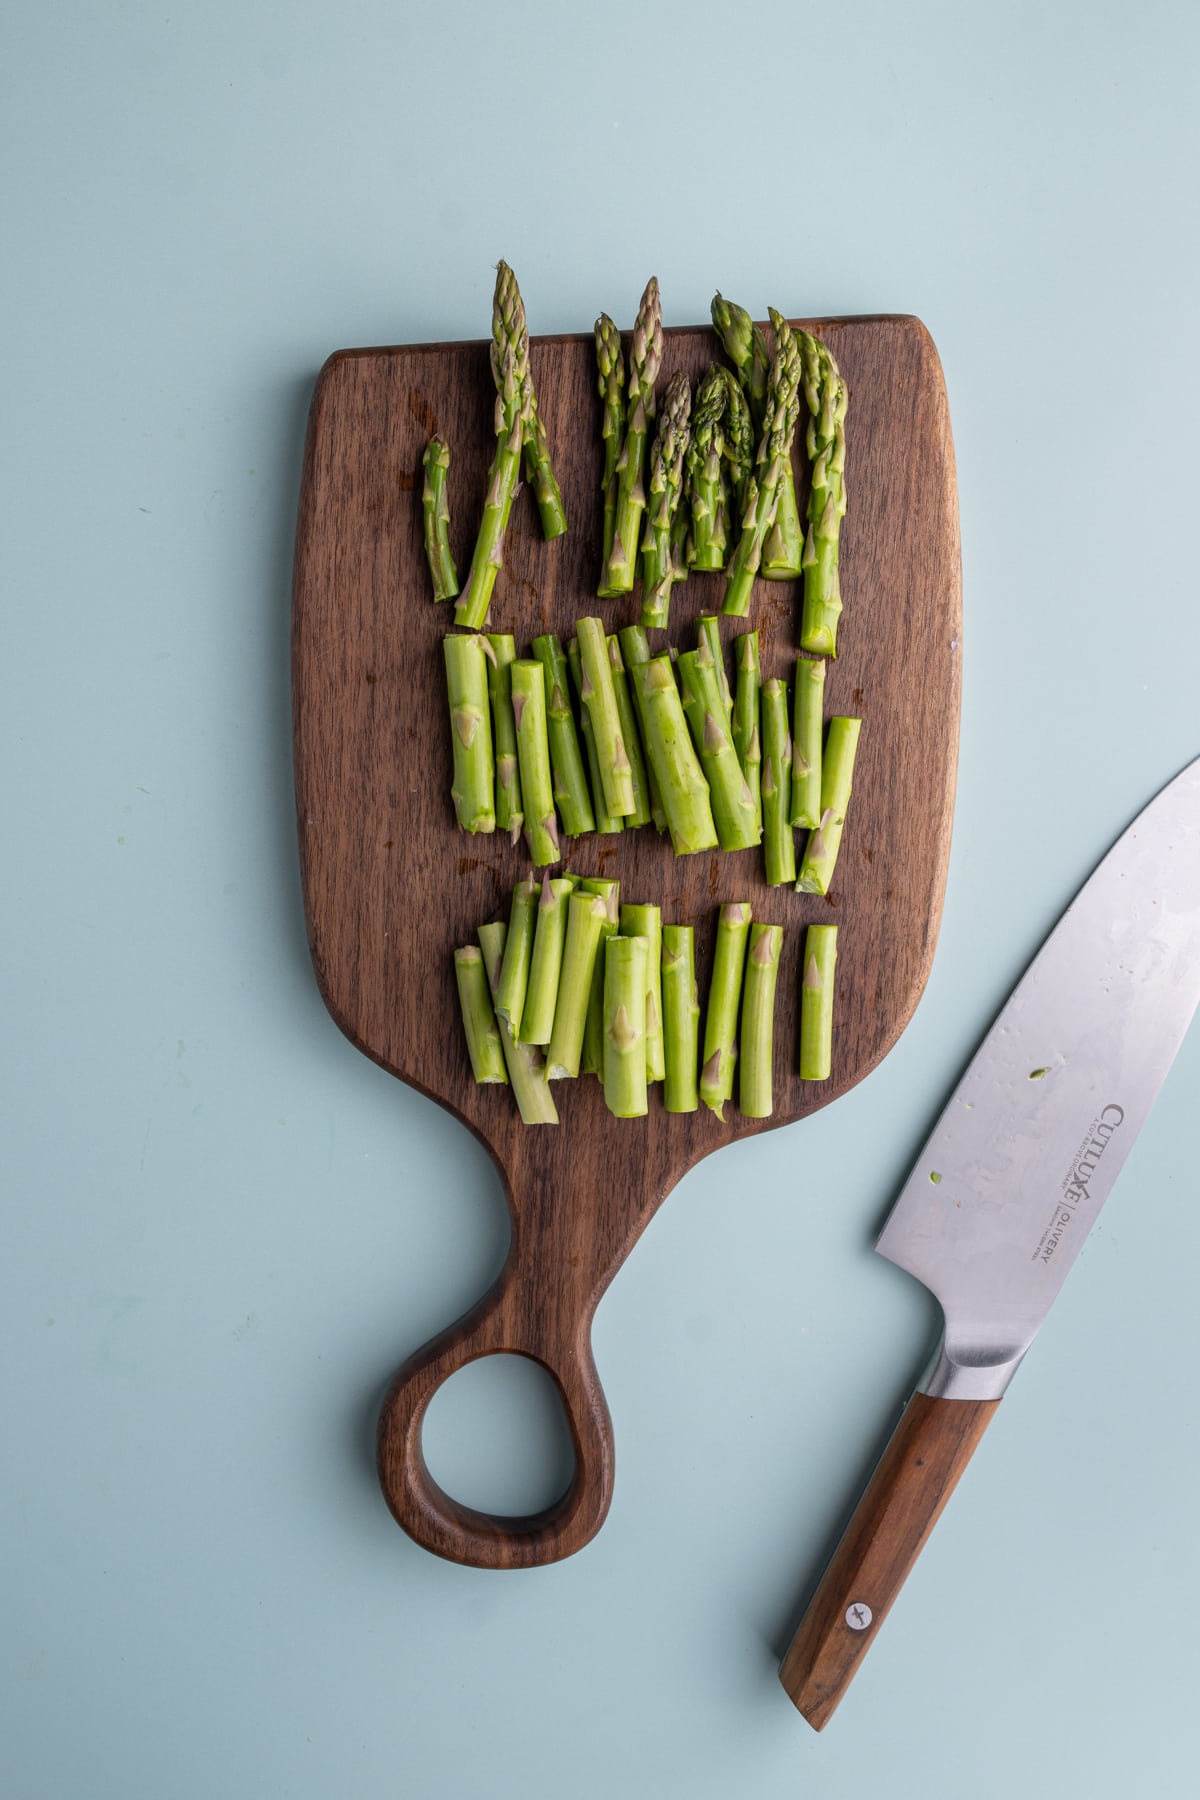 Asparagus chopped into bite-sized pieces